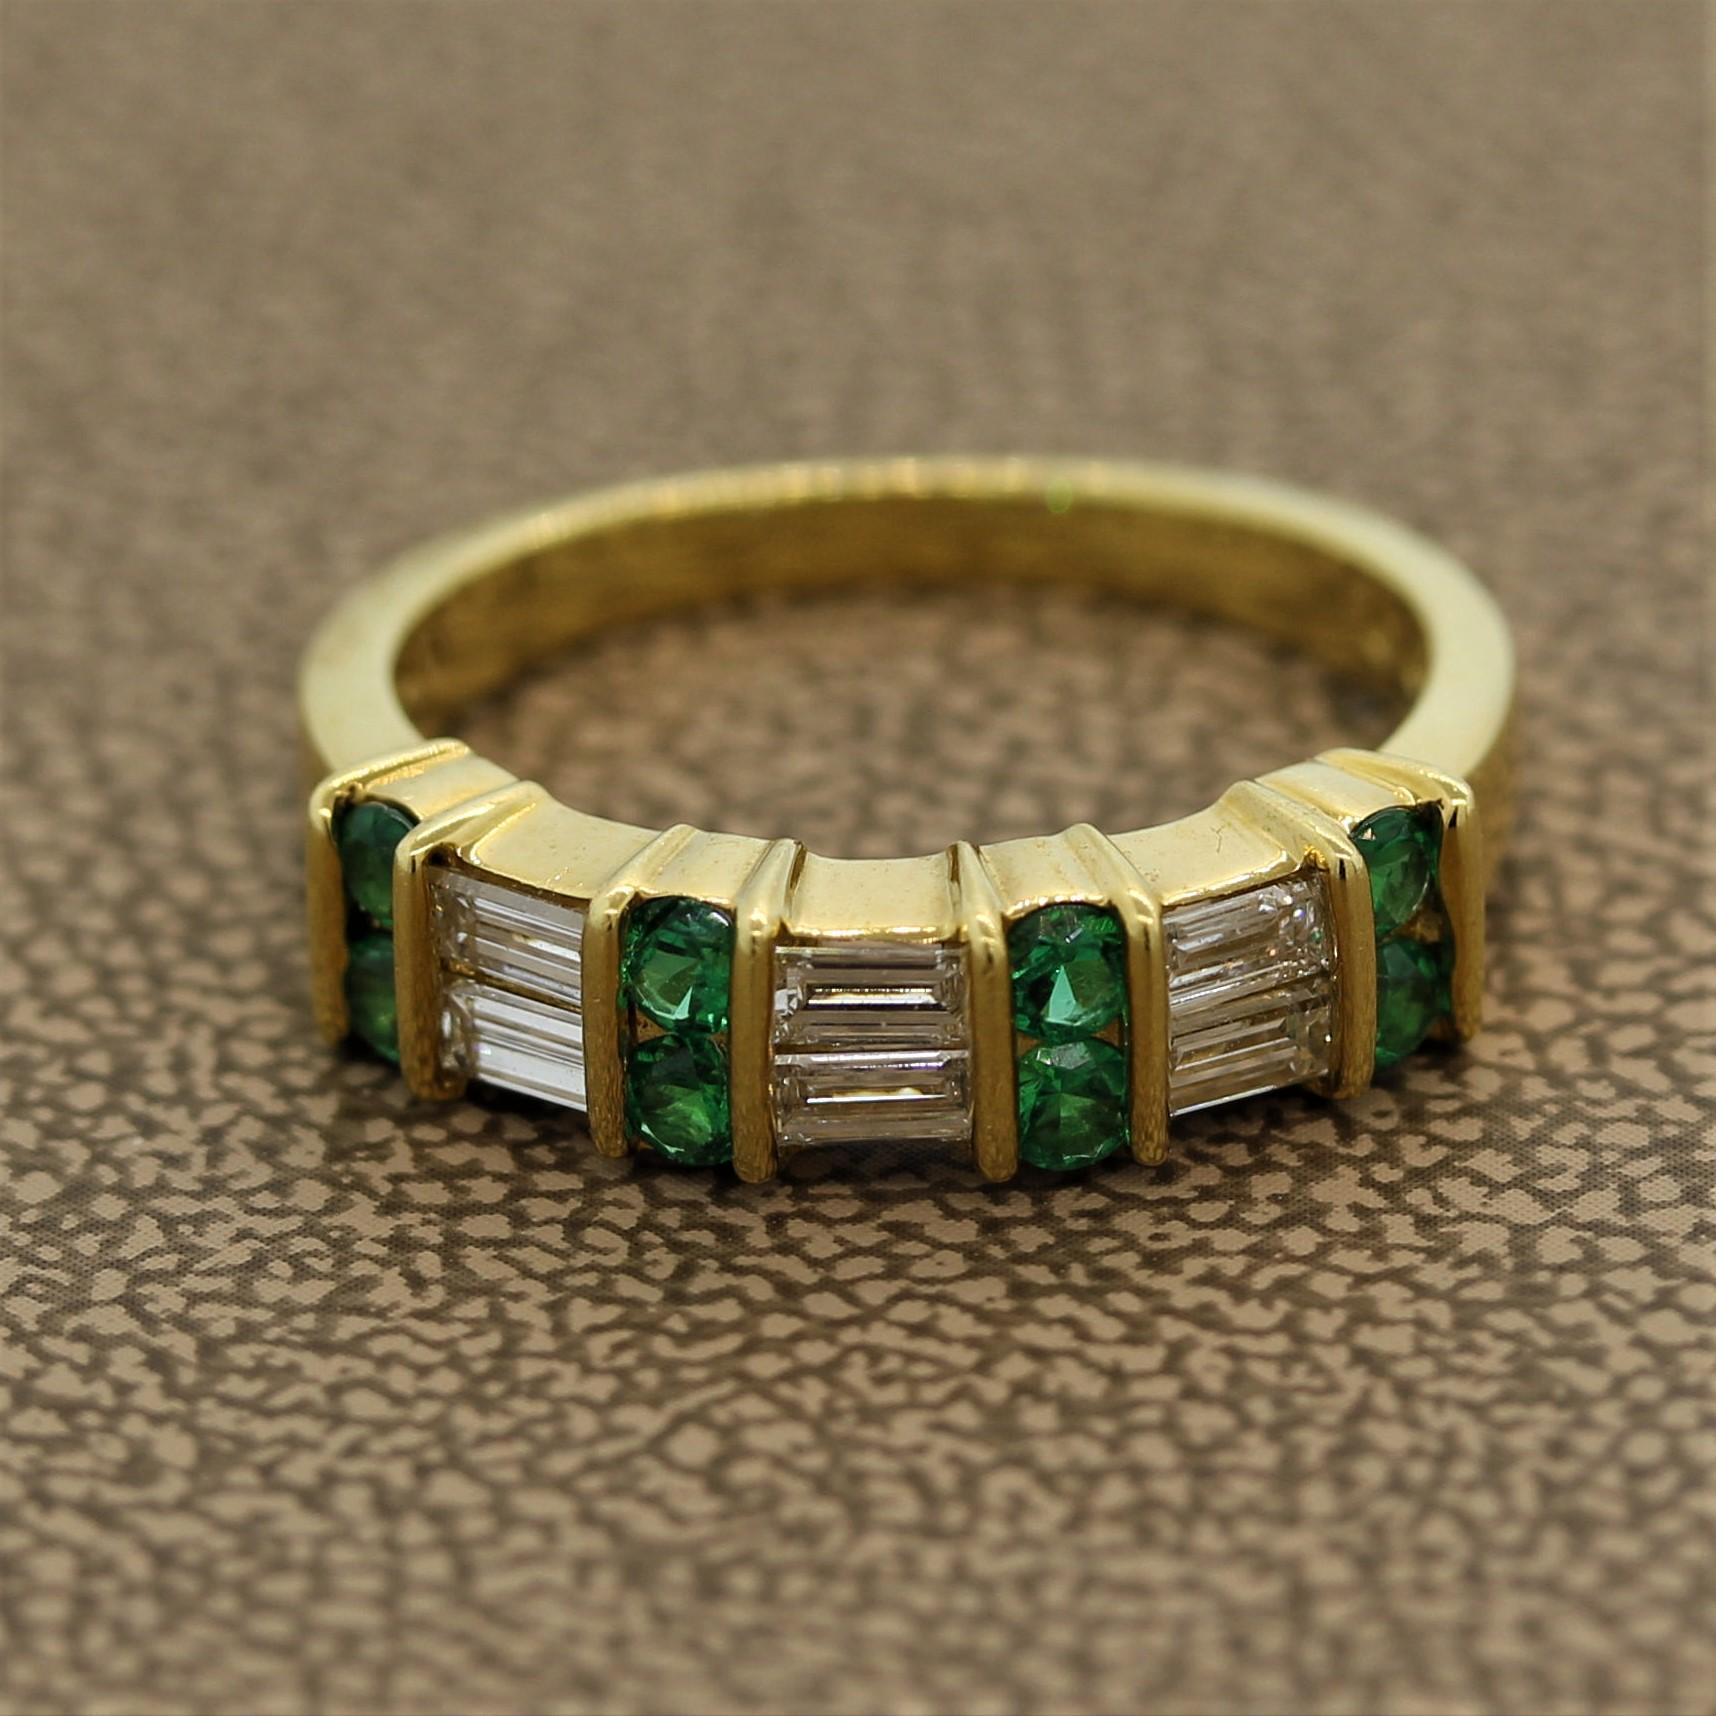 A classic piece from Gemlok, this band features 0.50 carats of straight baguette cut diamonds along with 0.40 carats of round cut vivid green emeralds. Gemlok is known for their high-quality workmanship and use of the best gemstones and diamonds.